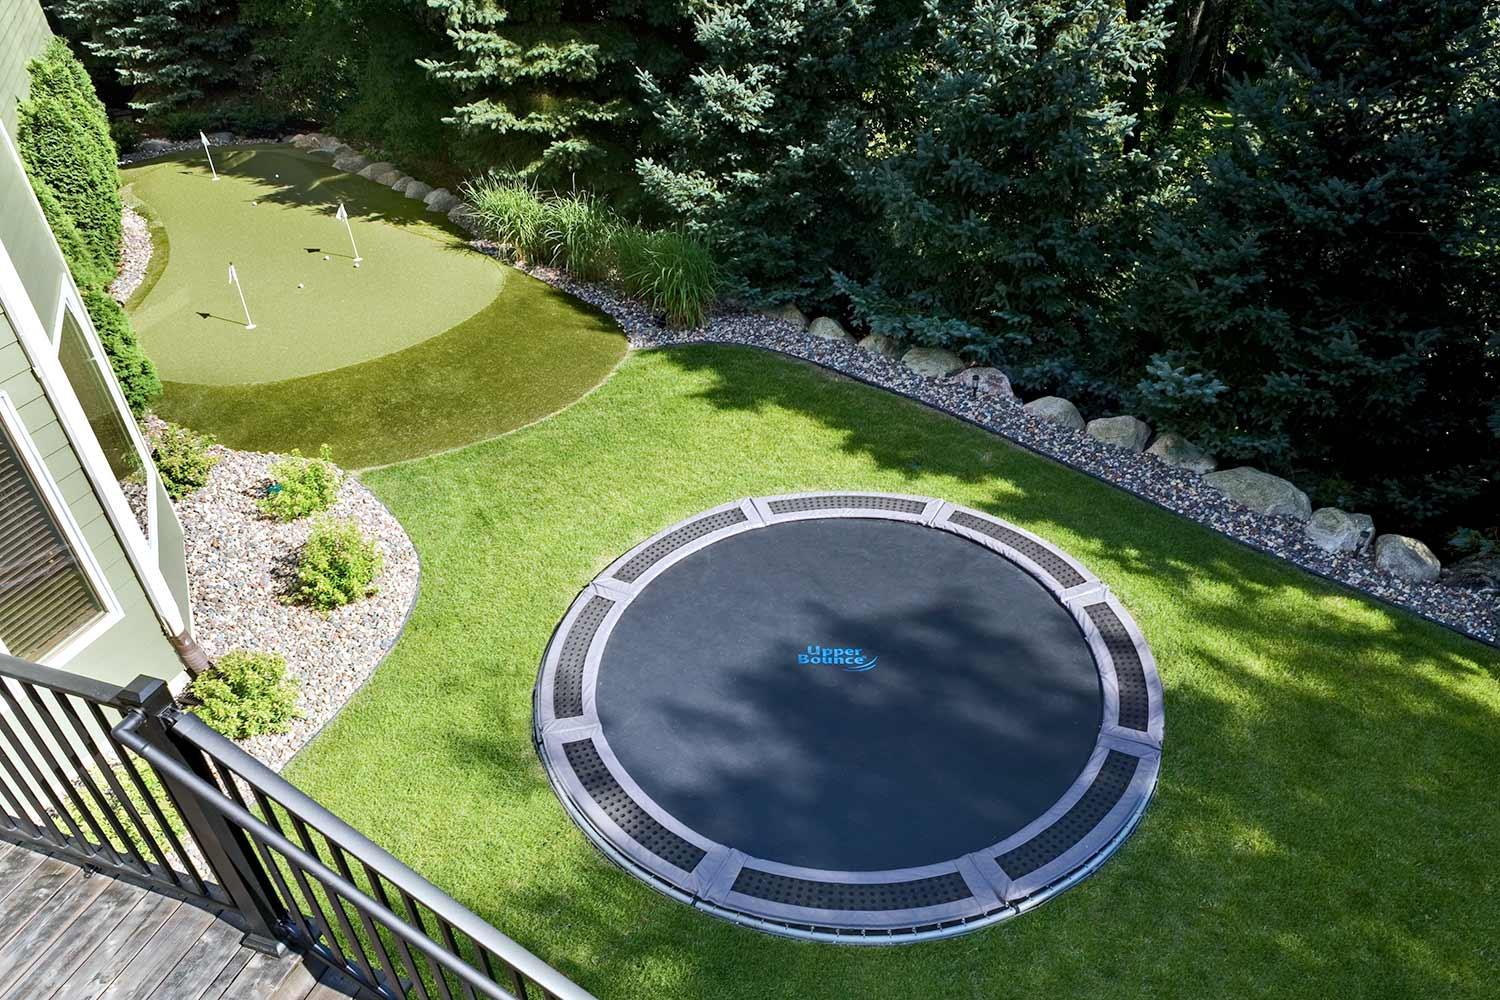 Backyard in-ground trampoline and putting green